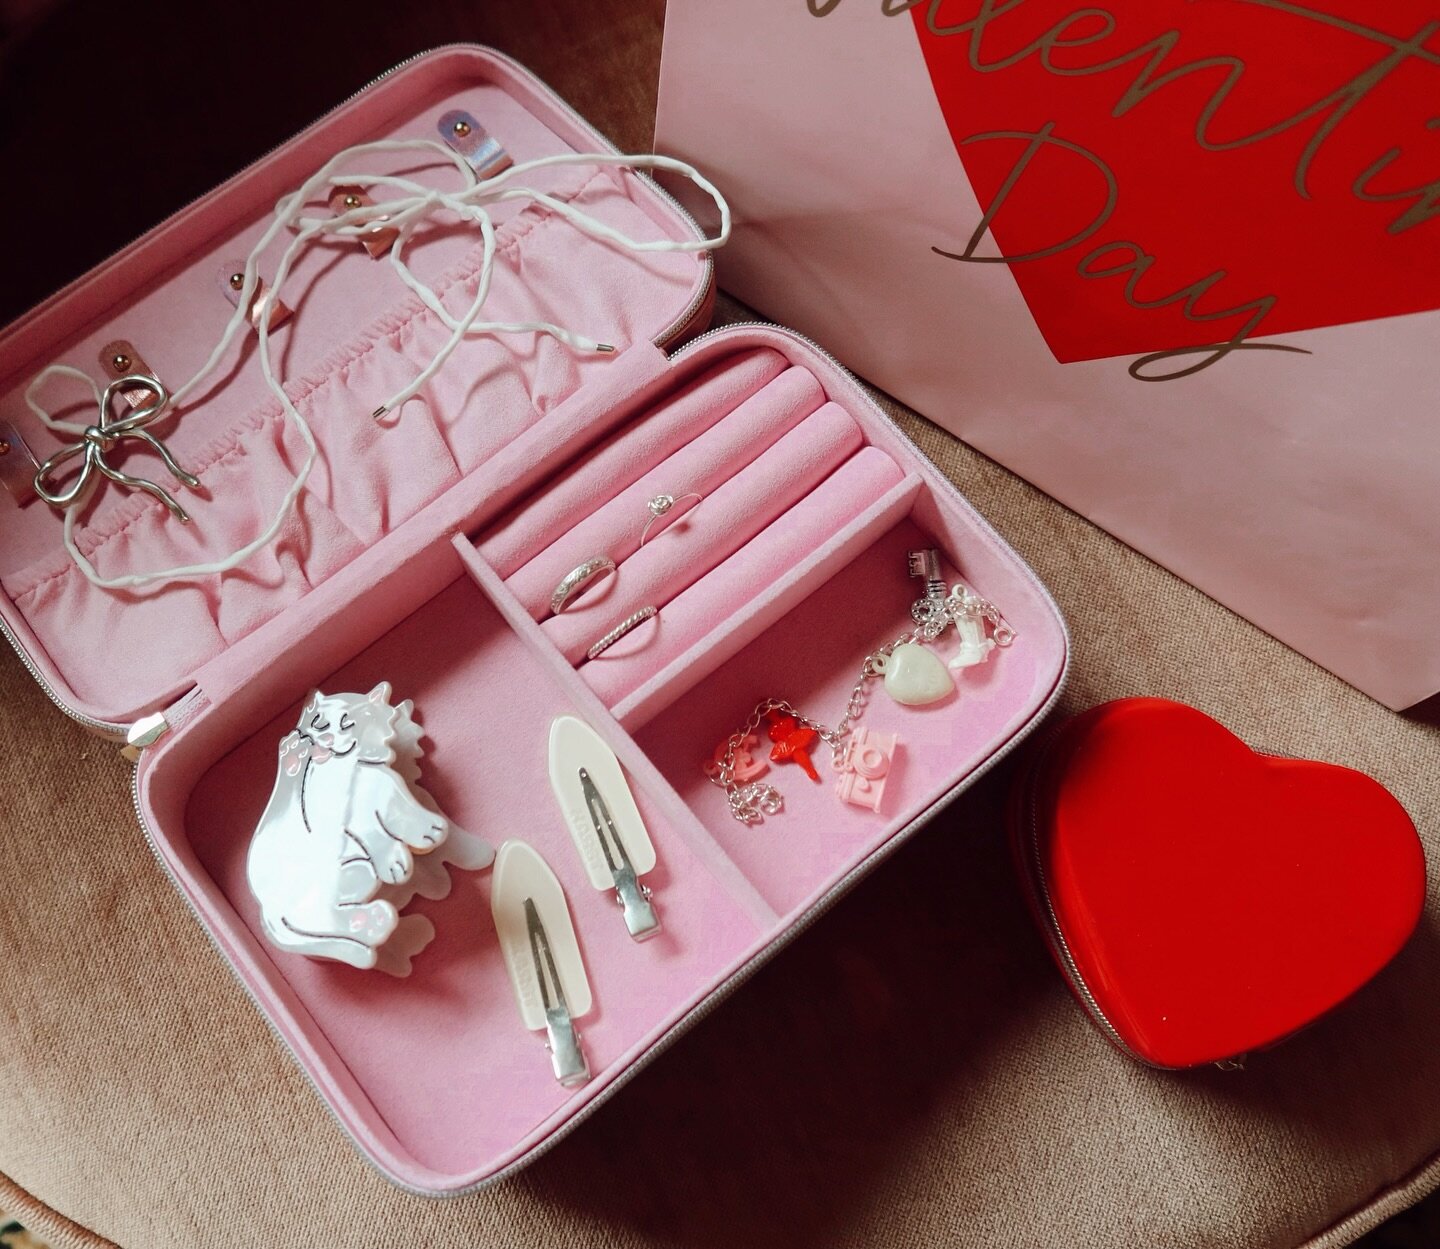 Get them something they will love this Valentine&rsquo;s Day - this adorable jewelry organizer is available now at @target 💝